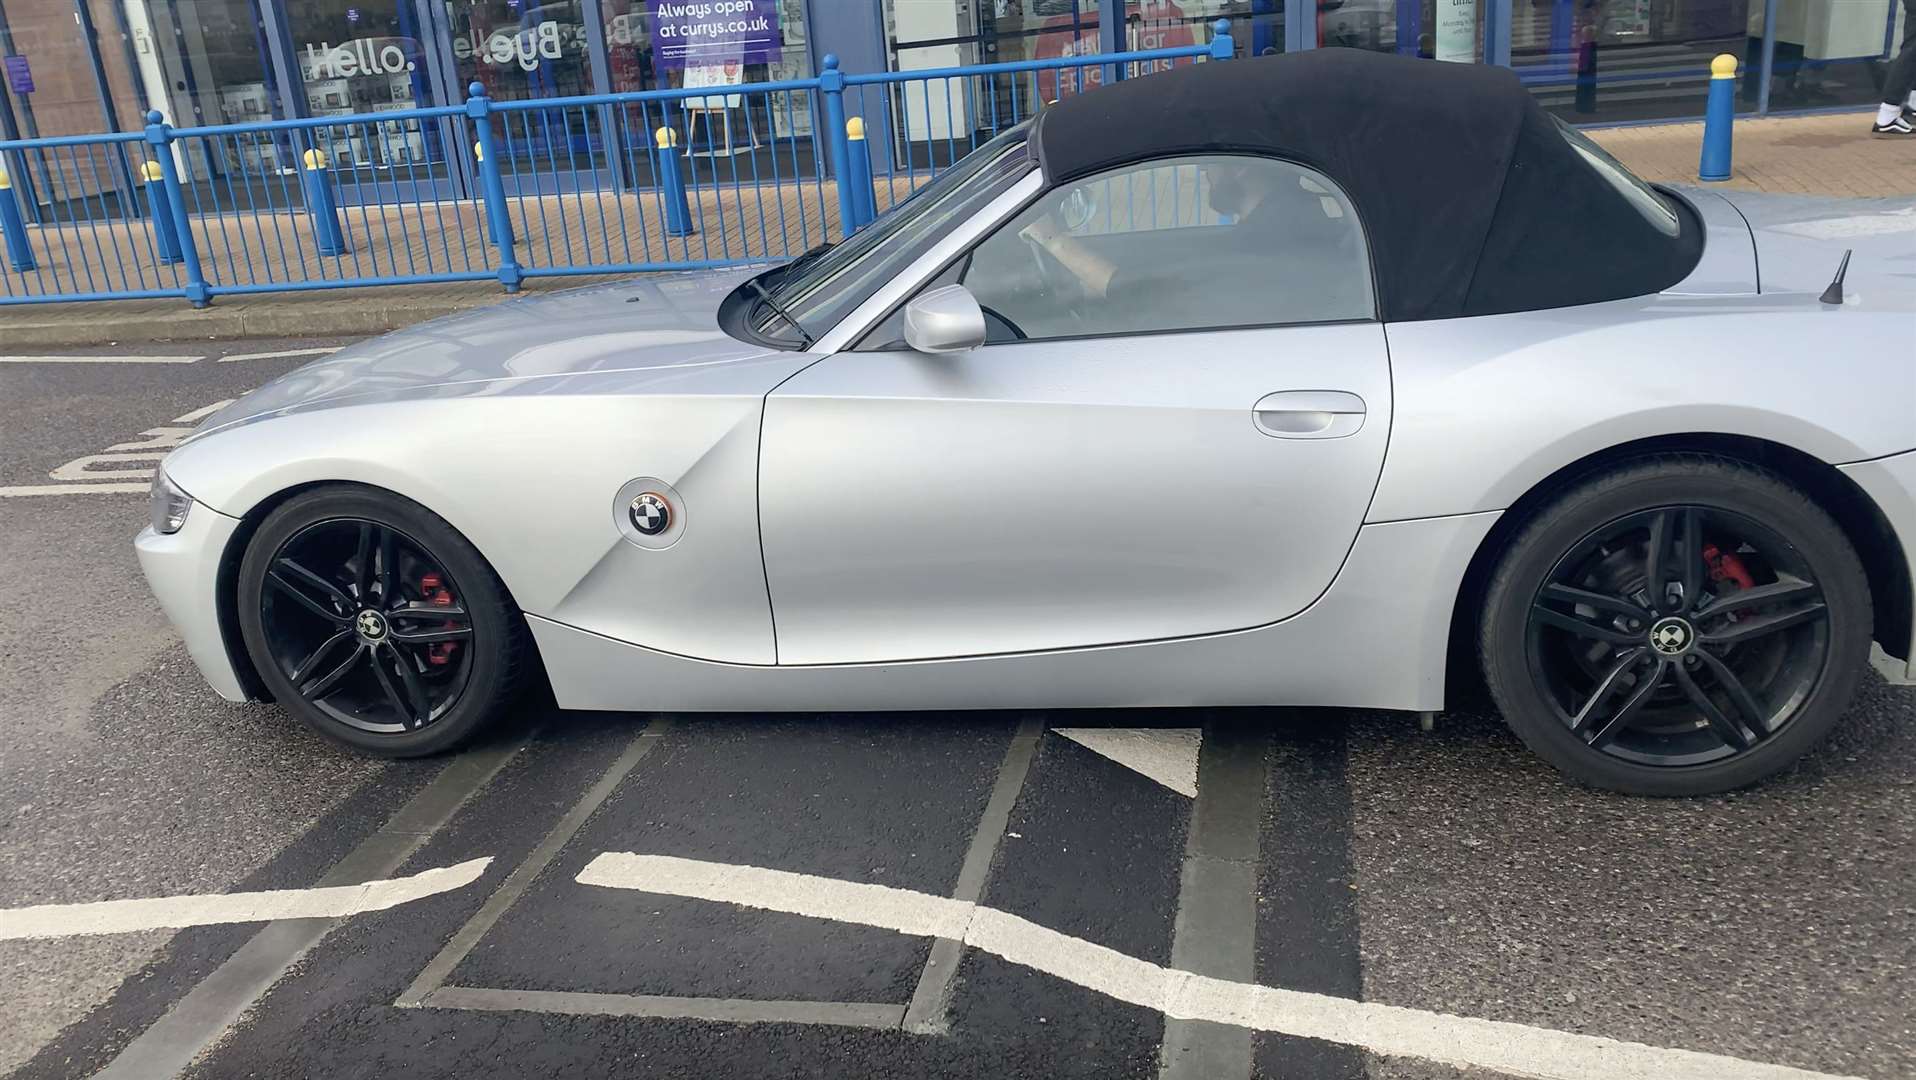 Low cars struggled on the Canterbury Retail Park speed bumps